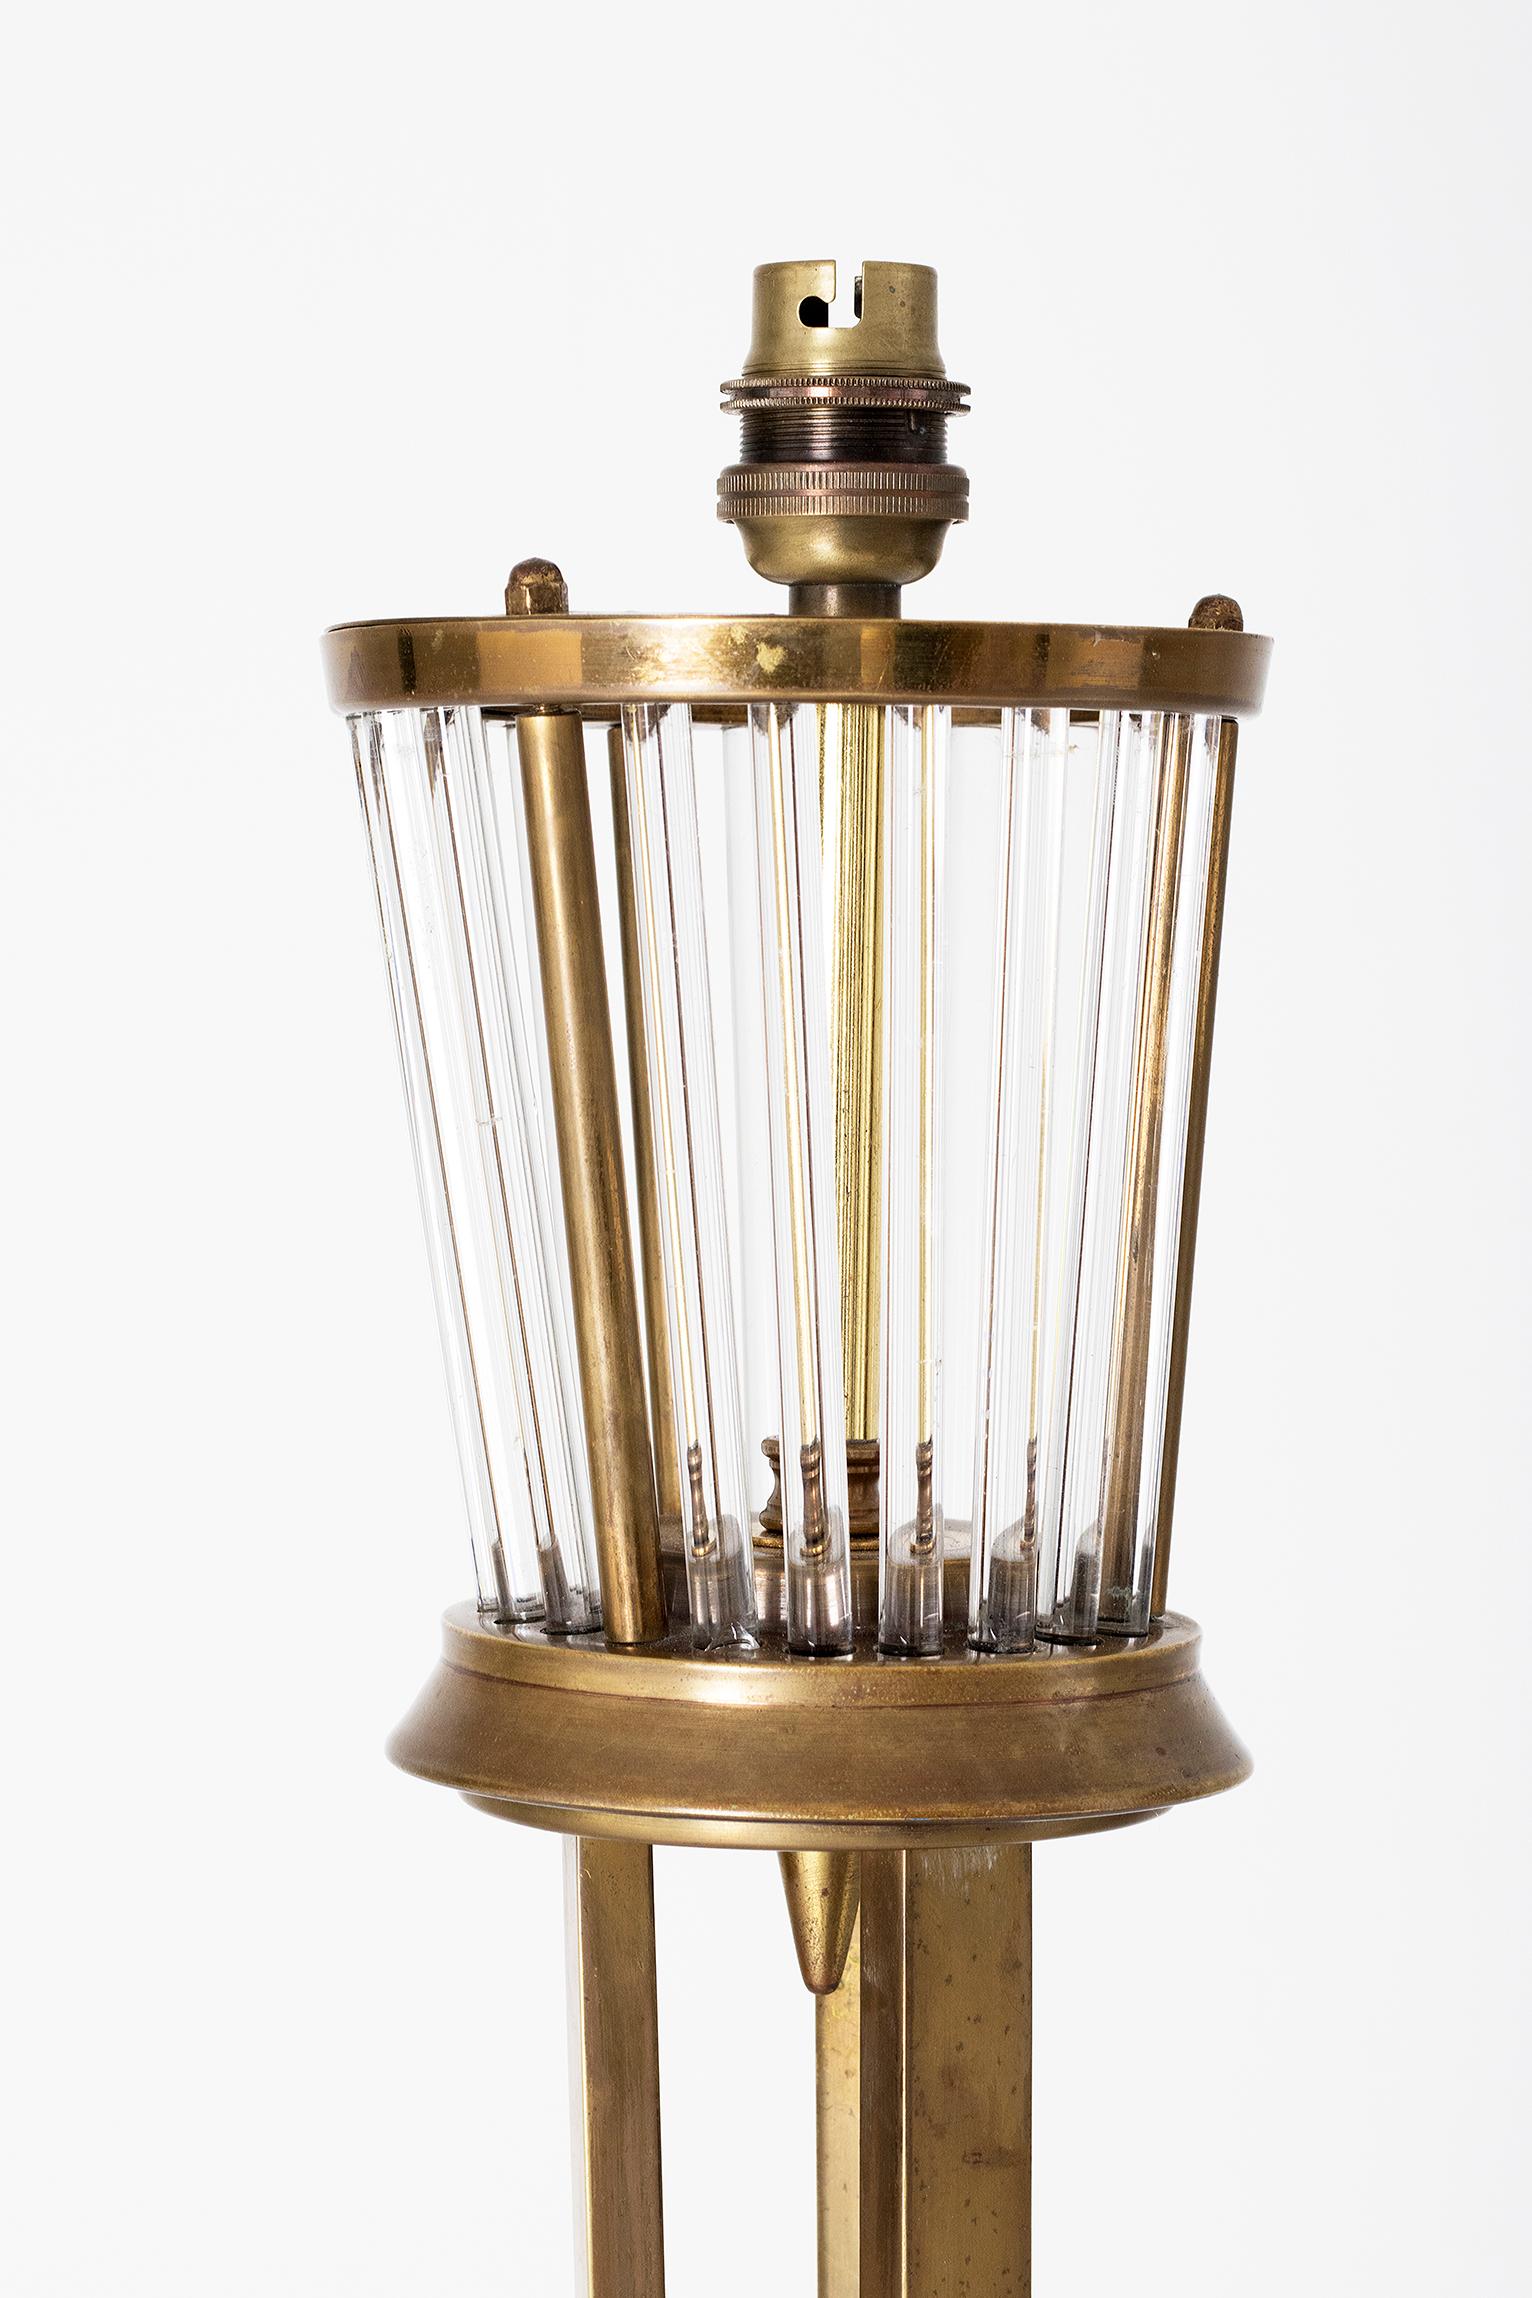 French Art Deco Brass and Glass Rods Floor Lamp by Henri Petitot for Atelier Petitot